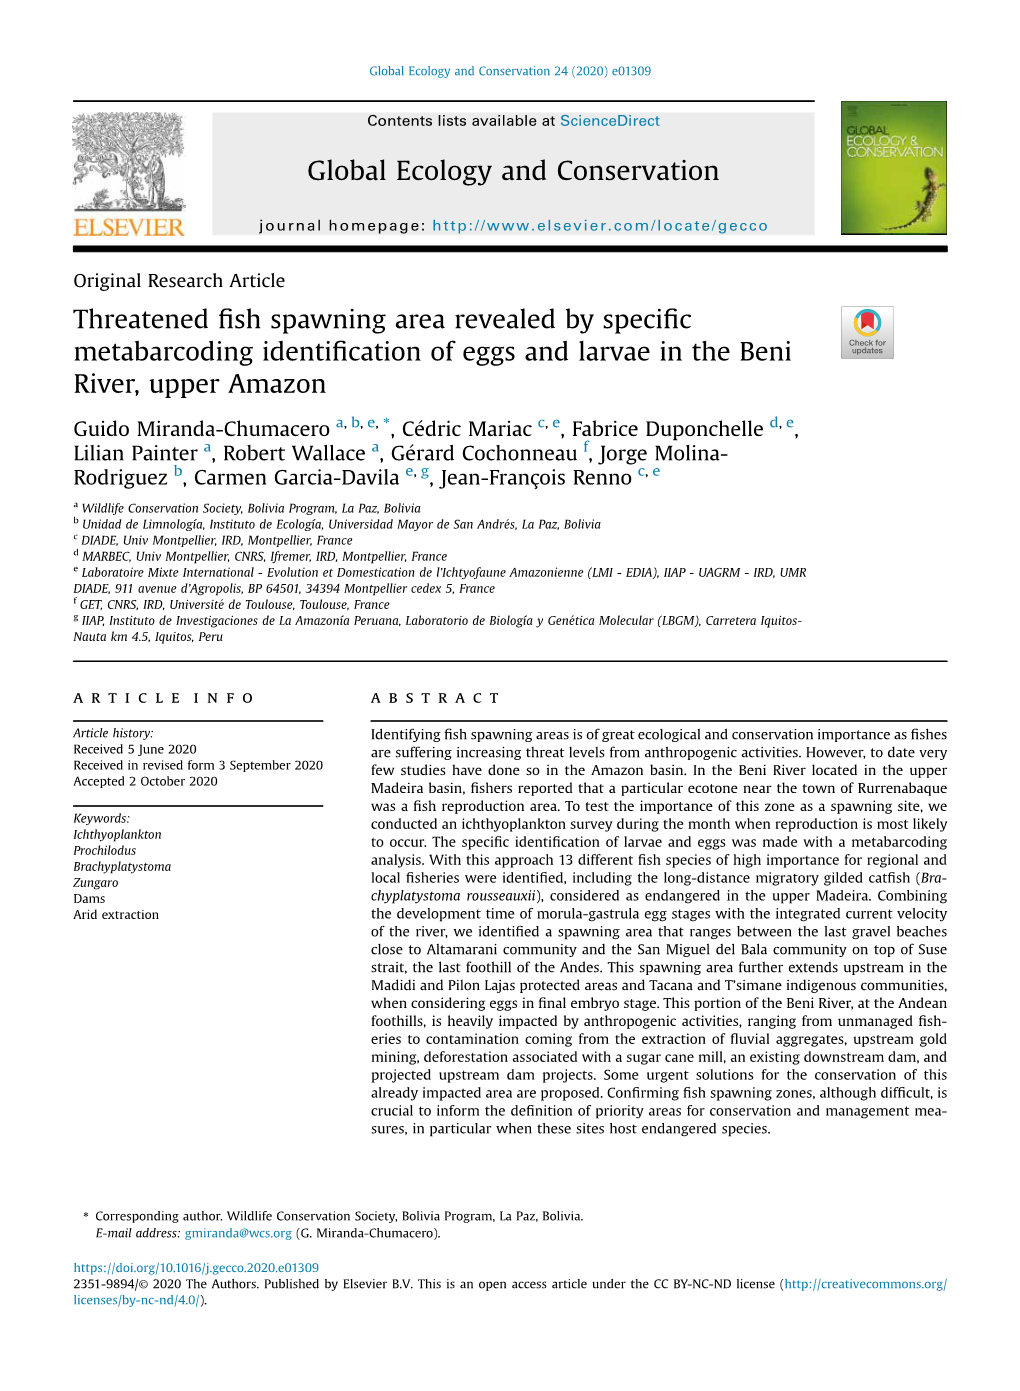 Threatened Fish Spawning Area Revealed by Specific Metabarcoding Identification of Eggs and Larvae in the Beni River, Upper Amaz